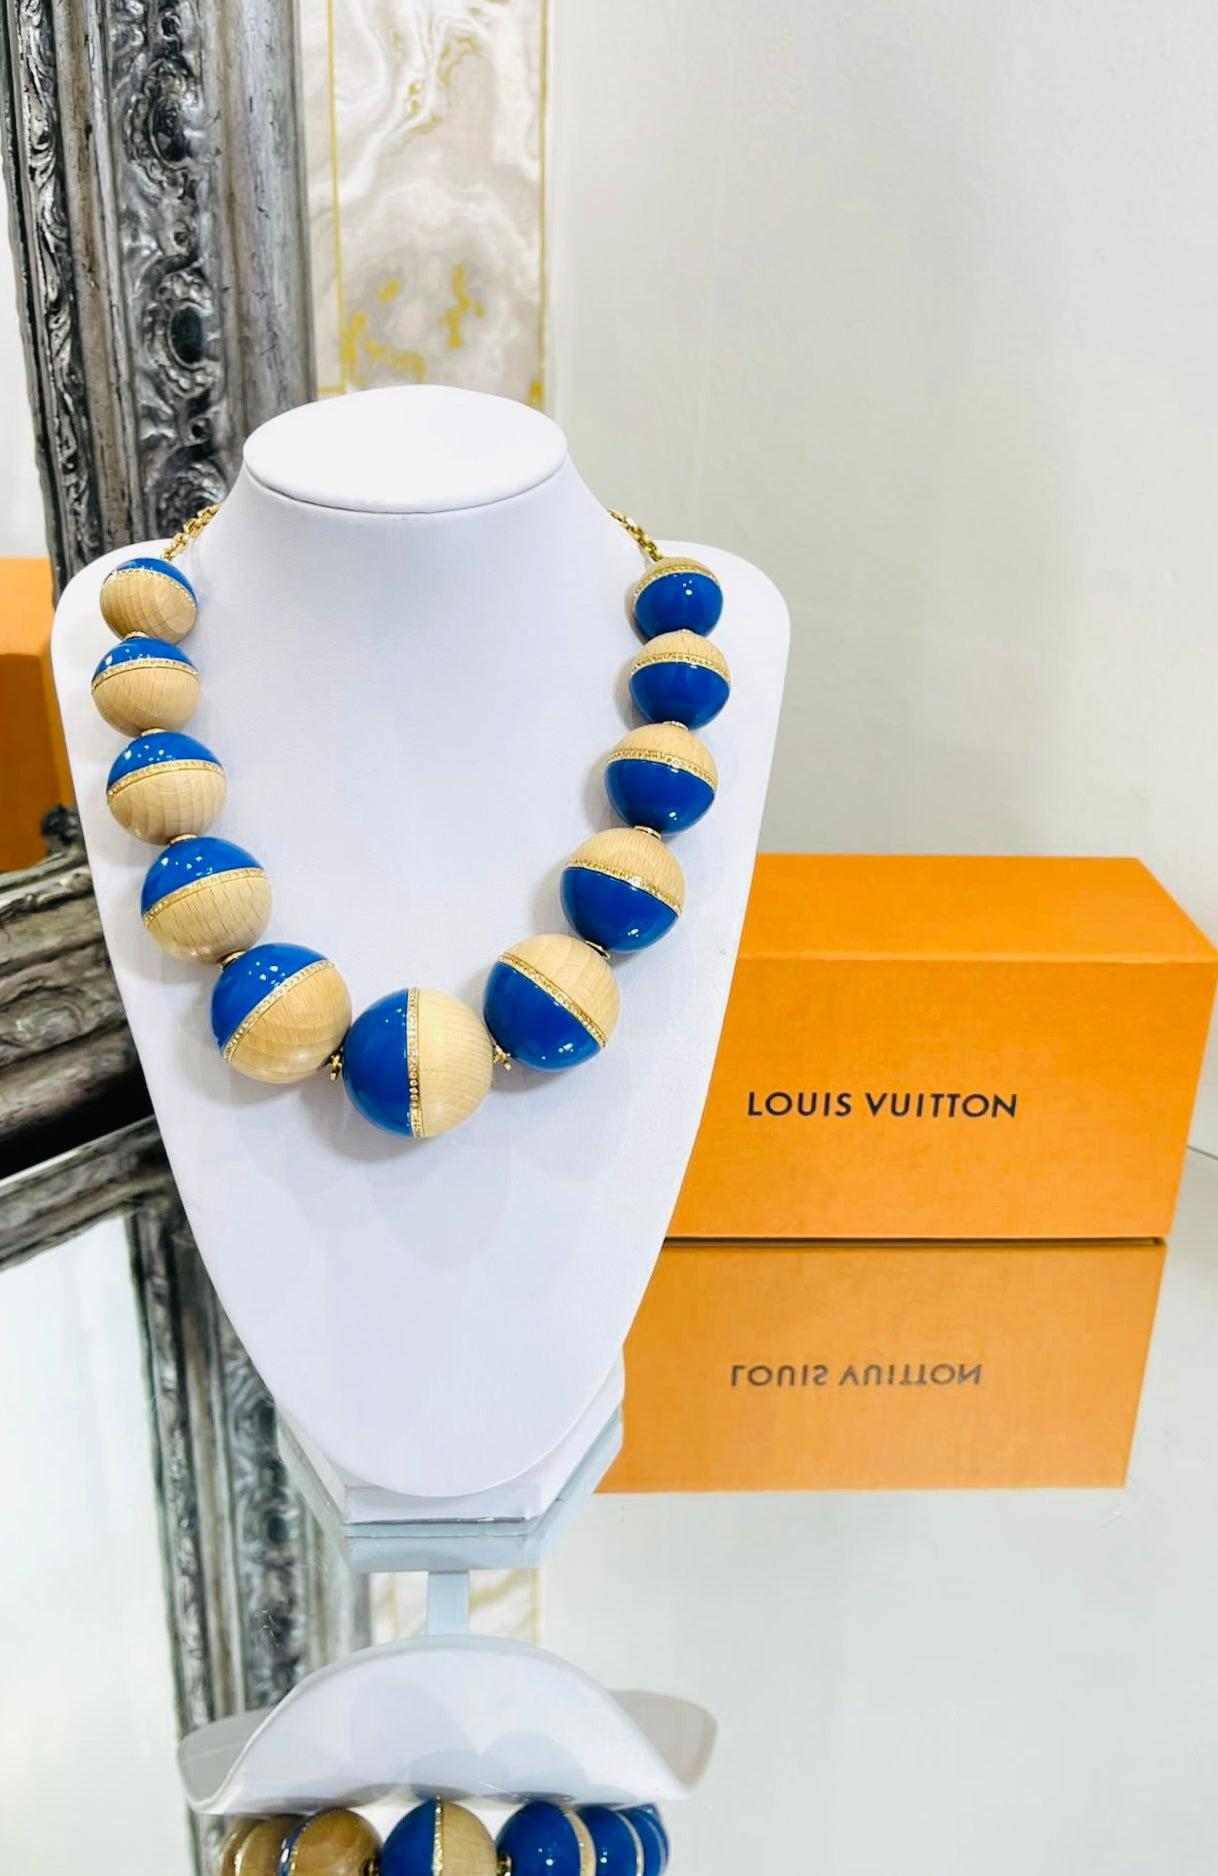 Louis Vuitton Crystal, Wood & Resin Beaded Necklace

Over sized in blue resin, wood with crystal embellishments

and gold chain. Lobster clasp closure with dangling 'LV' logo.

Size - One Size 

Condition - Very Good

Composition - Crystal, Wood,